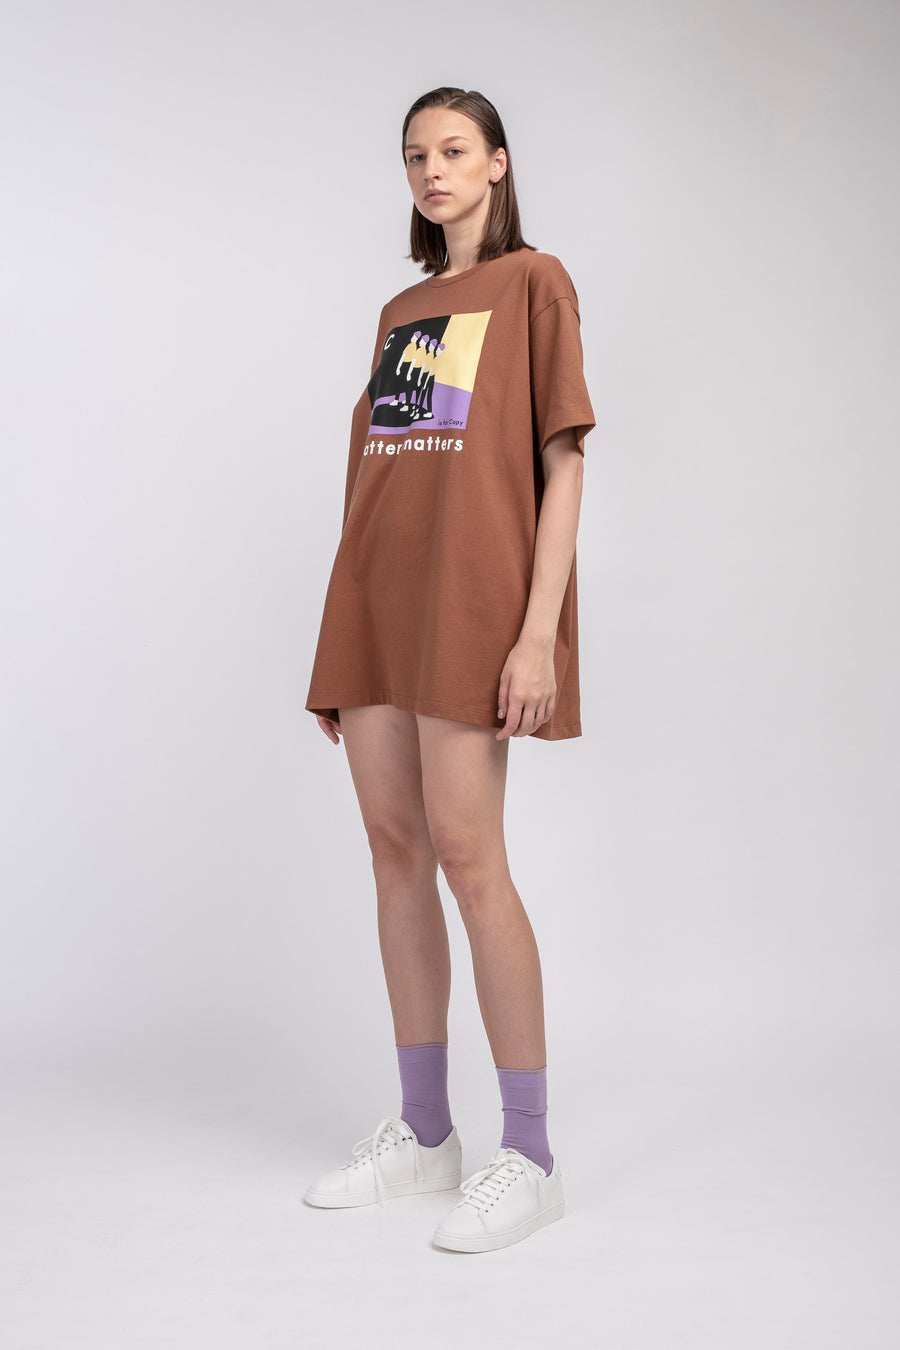 C is for Copy / T-shirt Dress • Brown